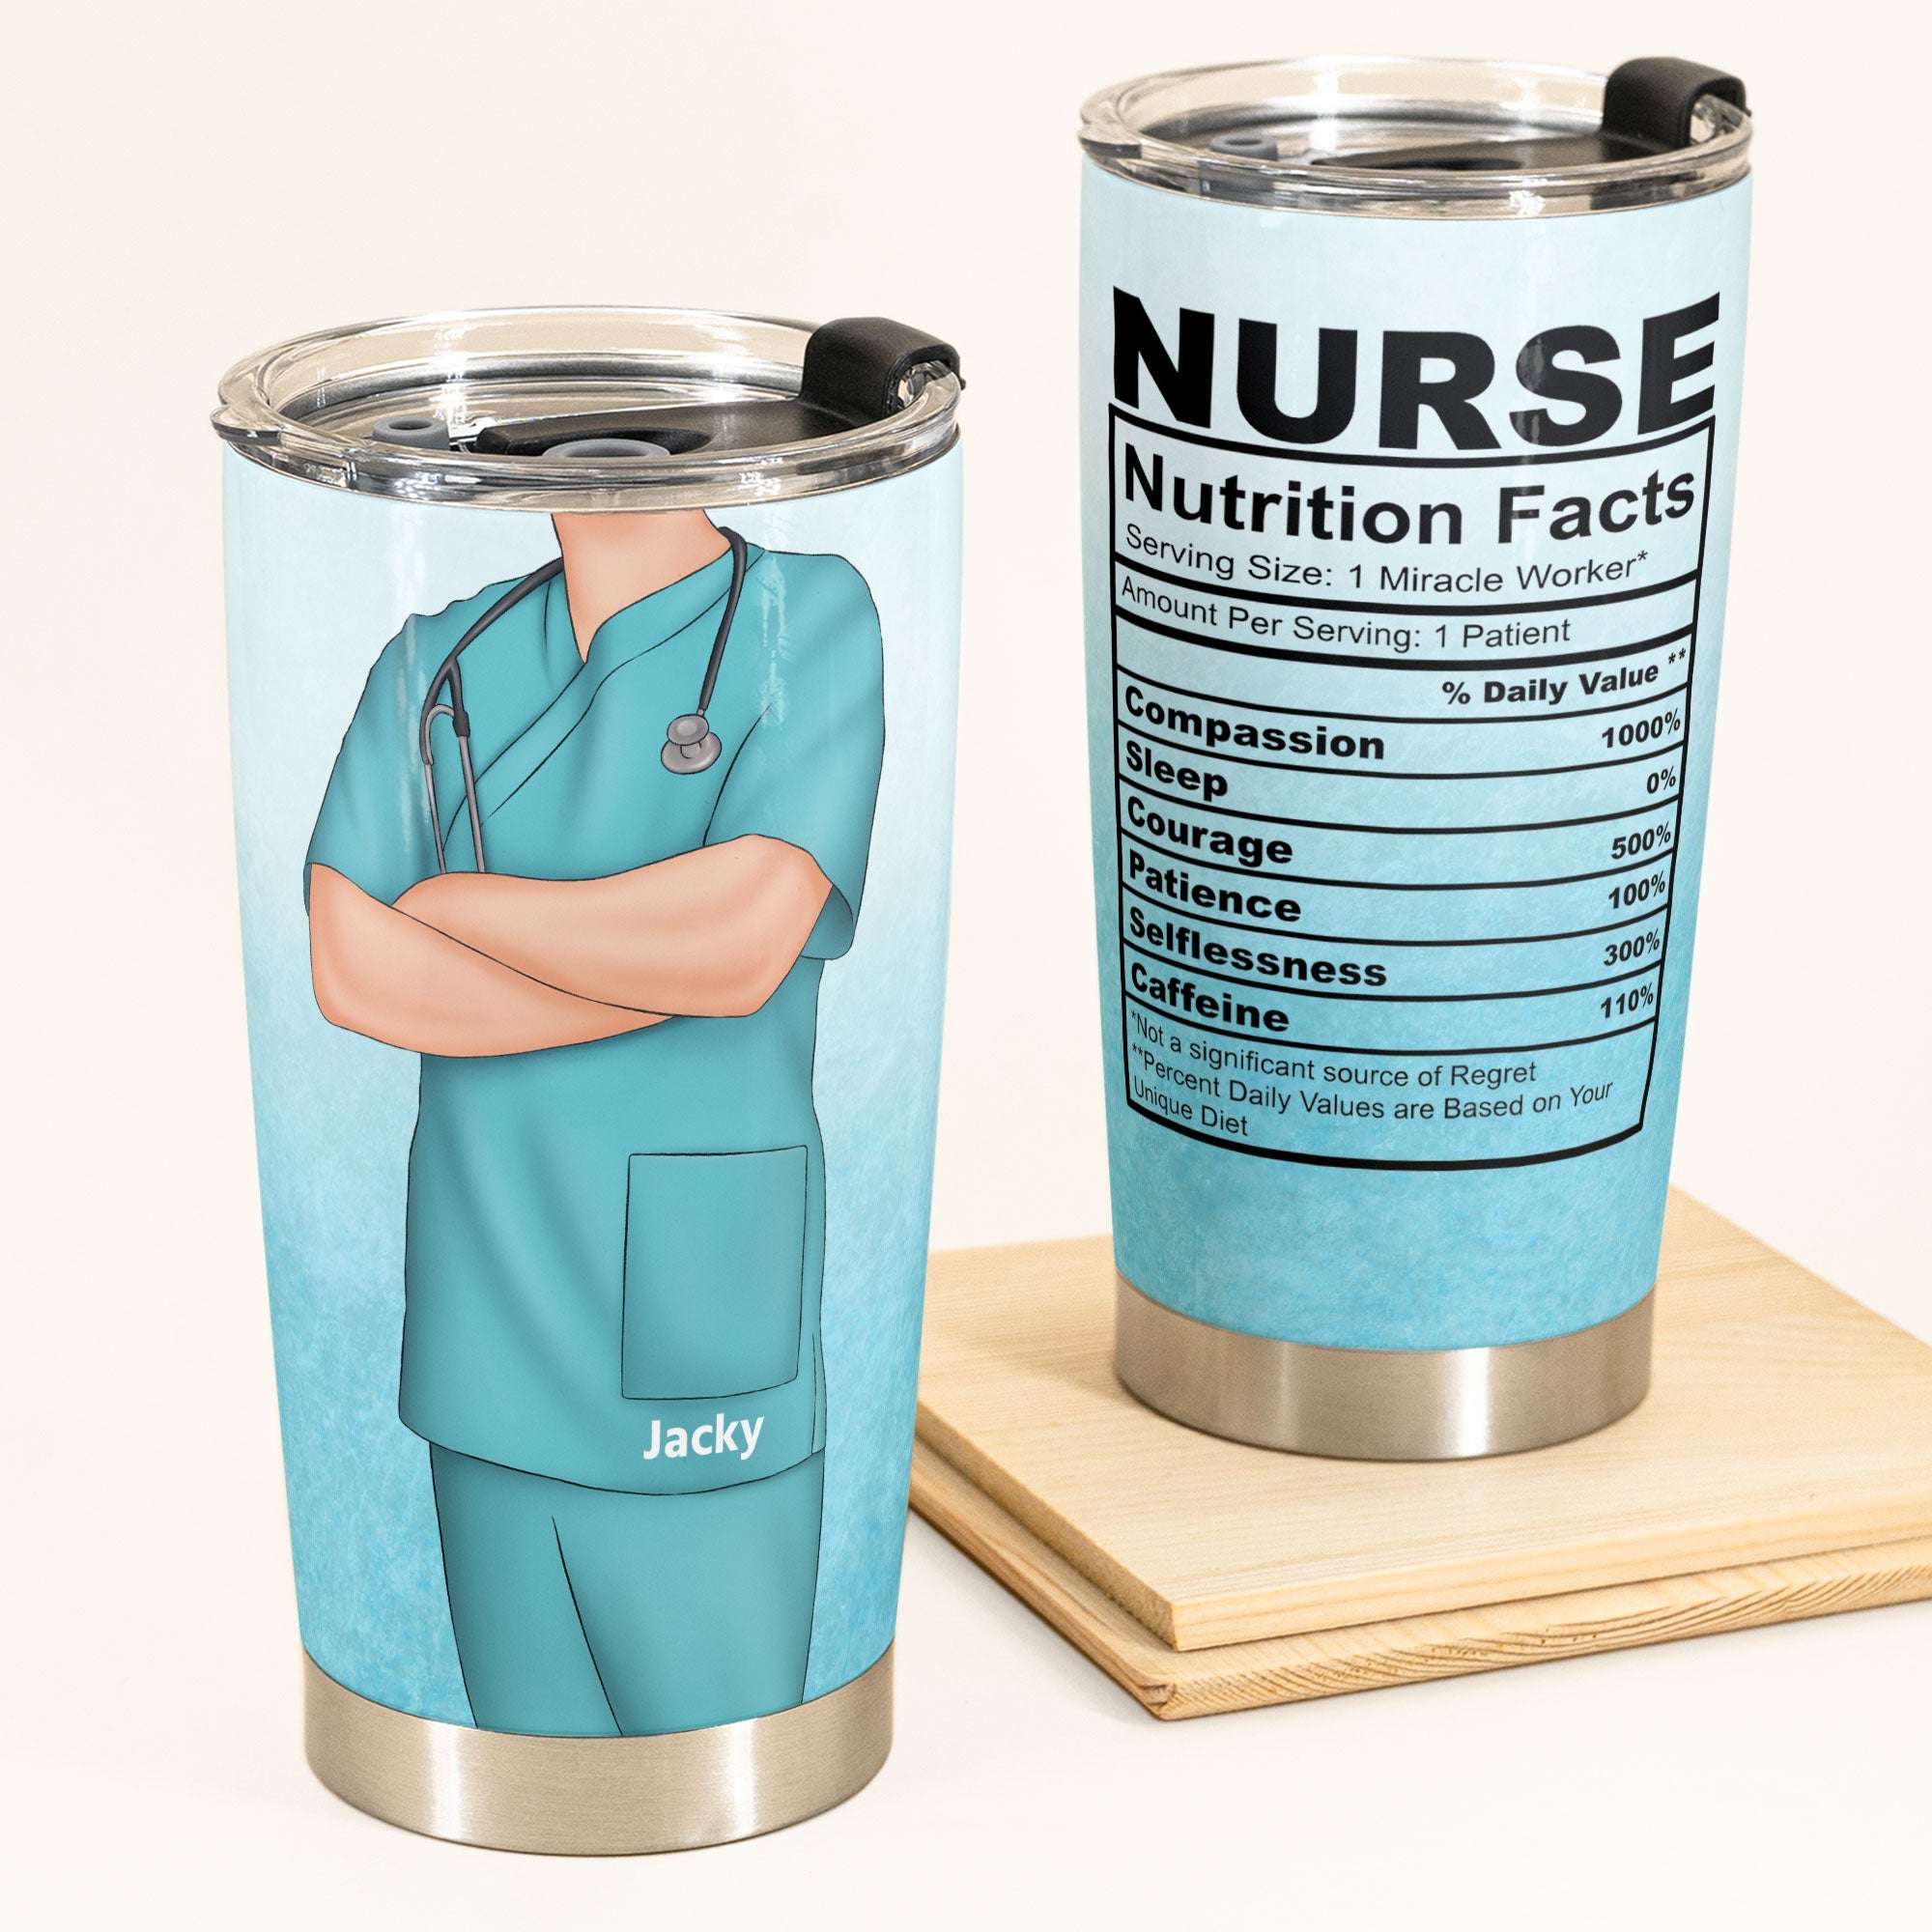 Nurse Nutrition Facts - Personalized Tumbler Cup - Birthday Gift For Nurse, Doctor - Male Nurse, Doctor